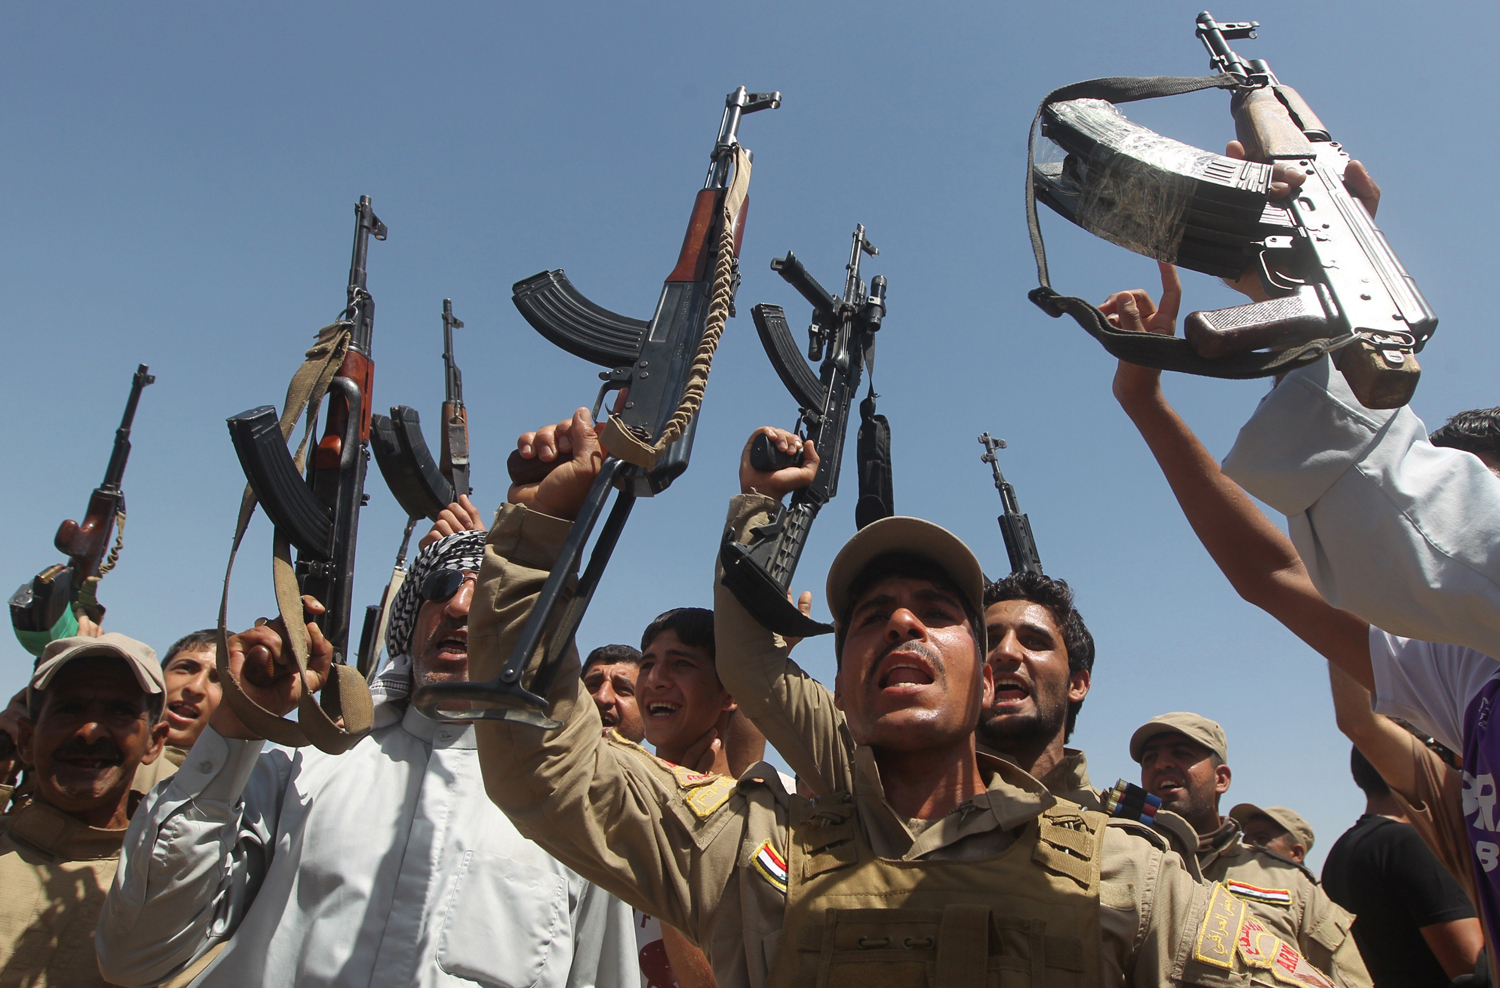 Shiite men, some of them wearing military fatigues and guns given by the government, raise their weapons as they gather in the Iraqi town of Jdaideh in the Diyala province on June 14, to show their support for the call to arms by Shiite cleric Grand Ayatollah Ali al-Sistani.